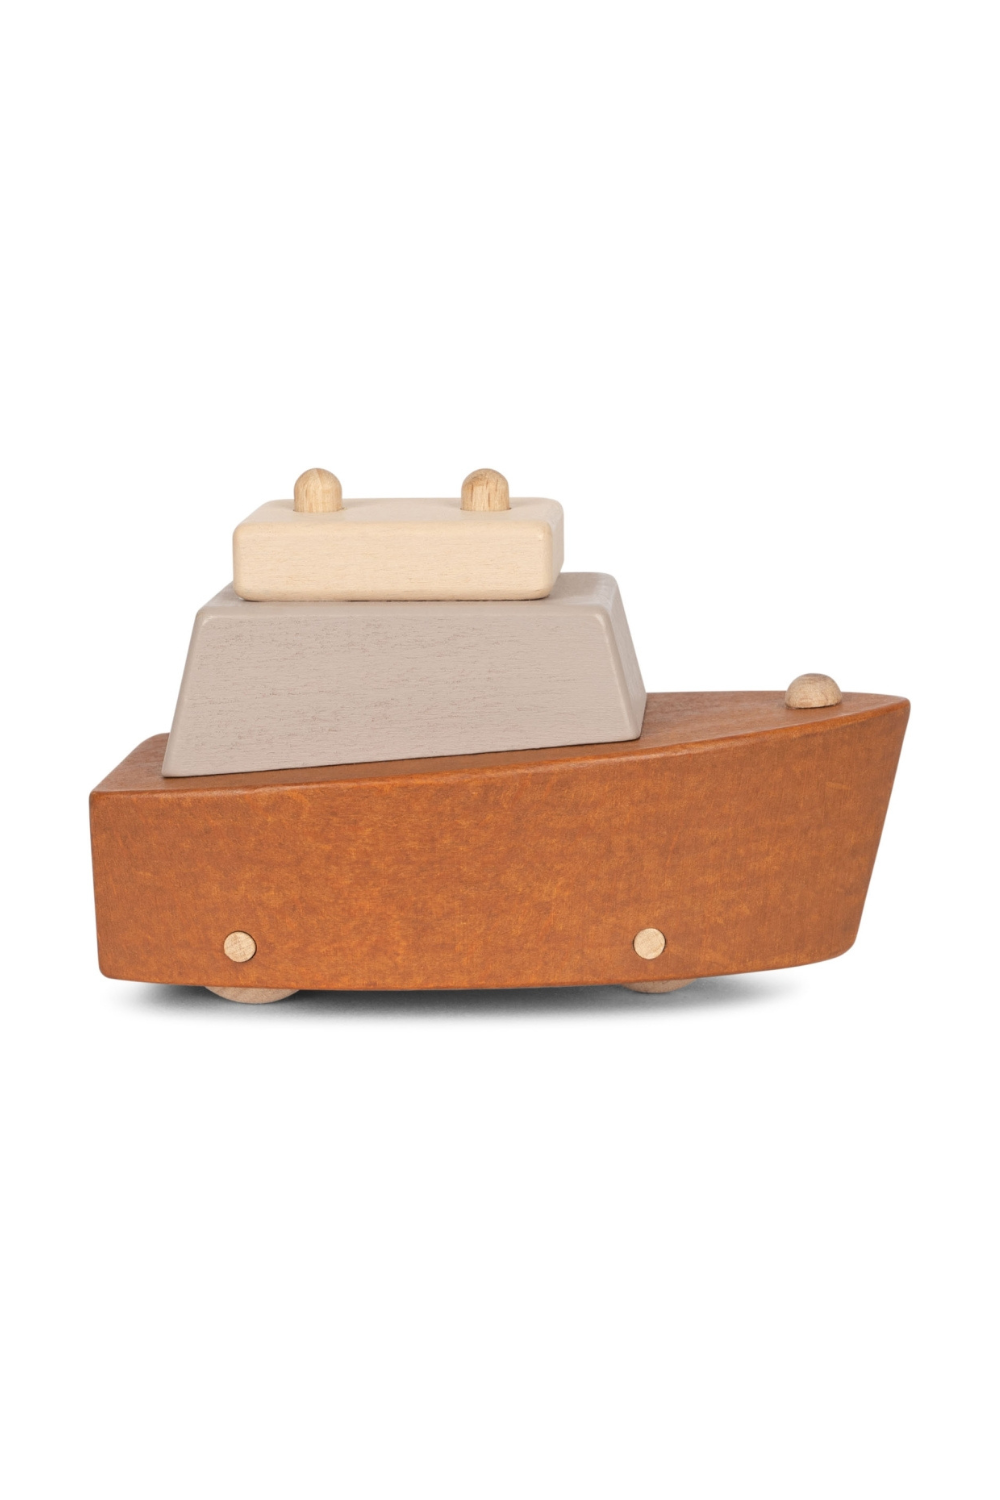 Rolling Wooden Boats (2 pack)